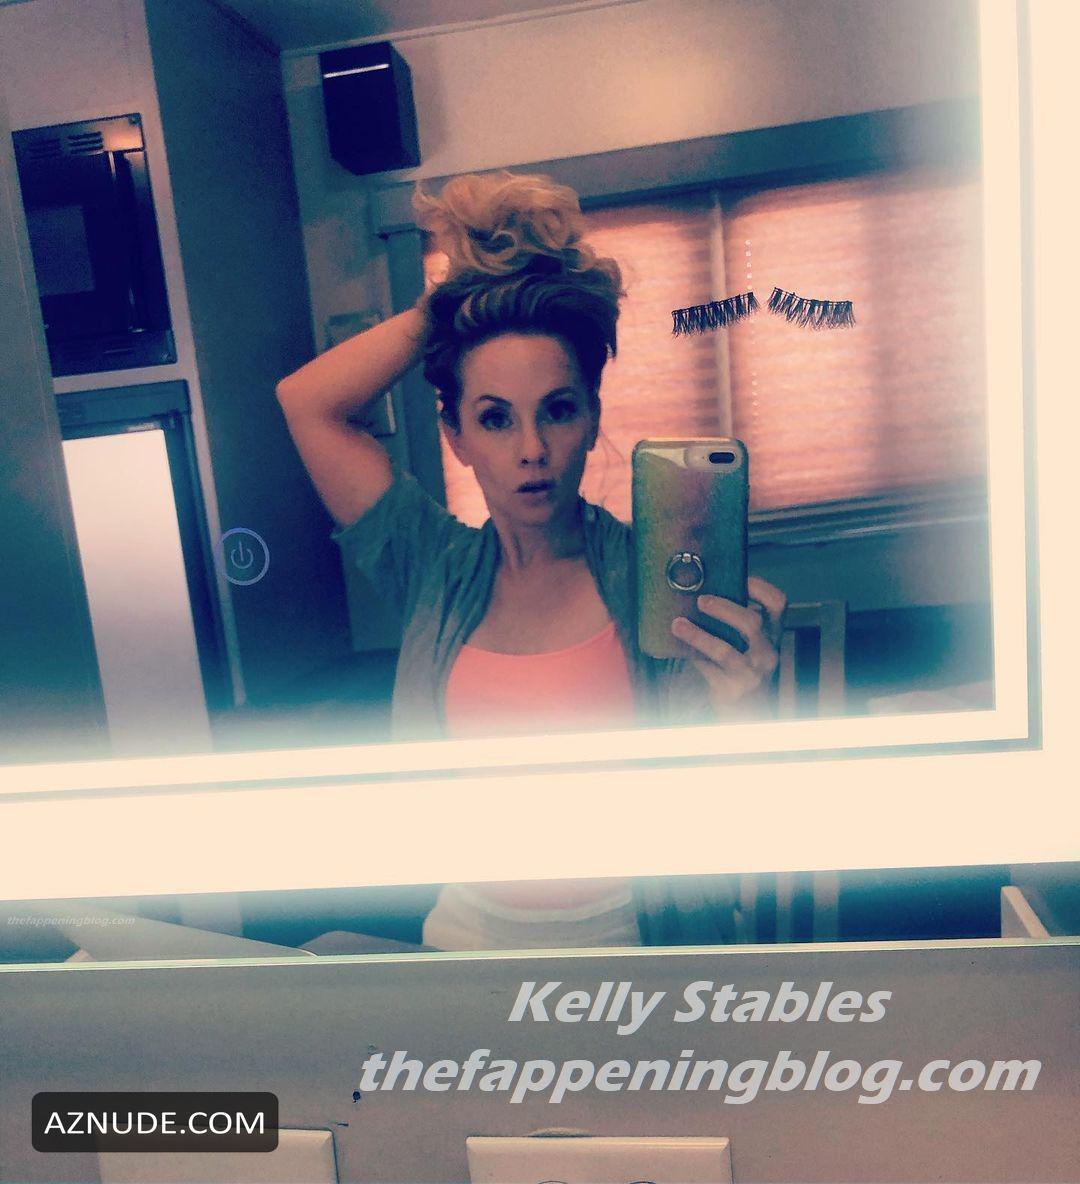 Kelly stables nude photos